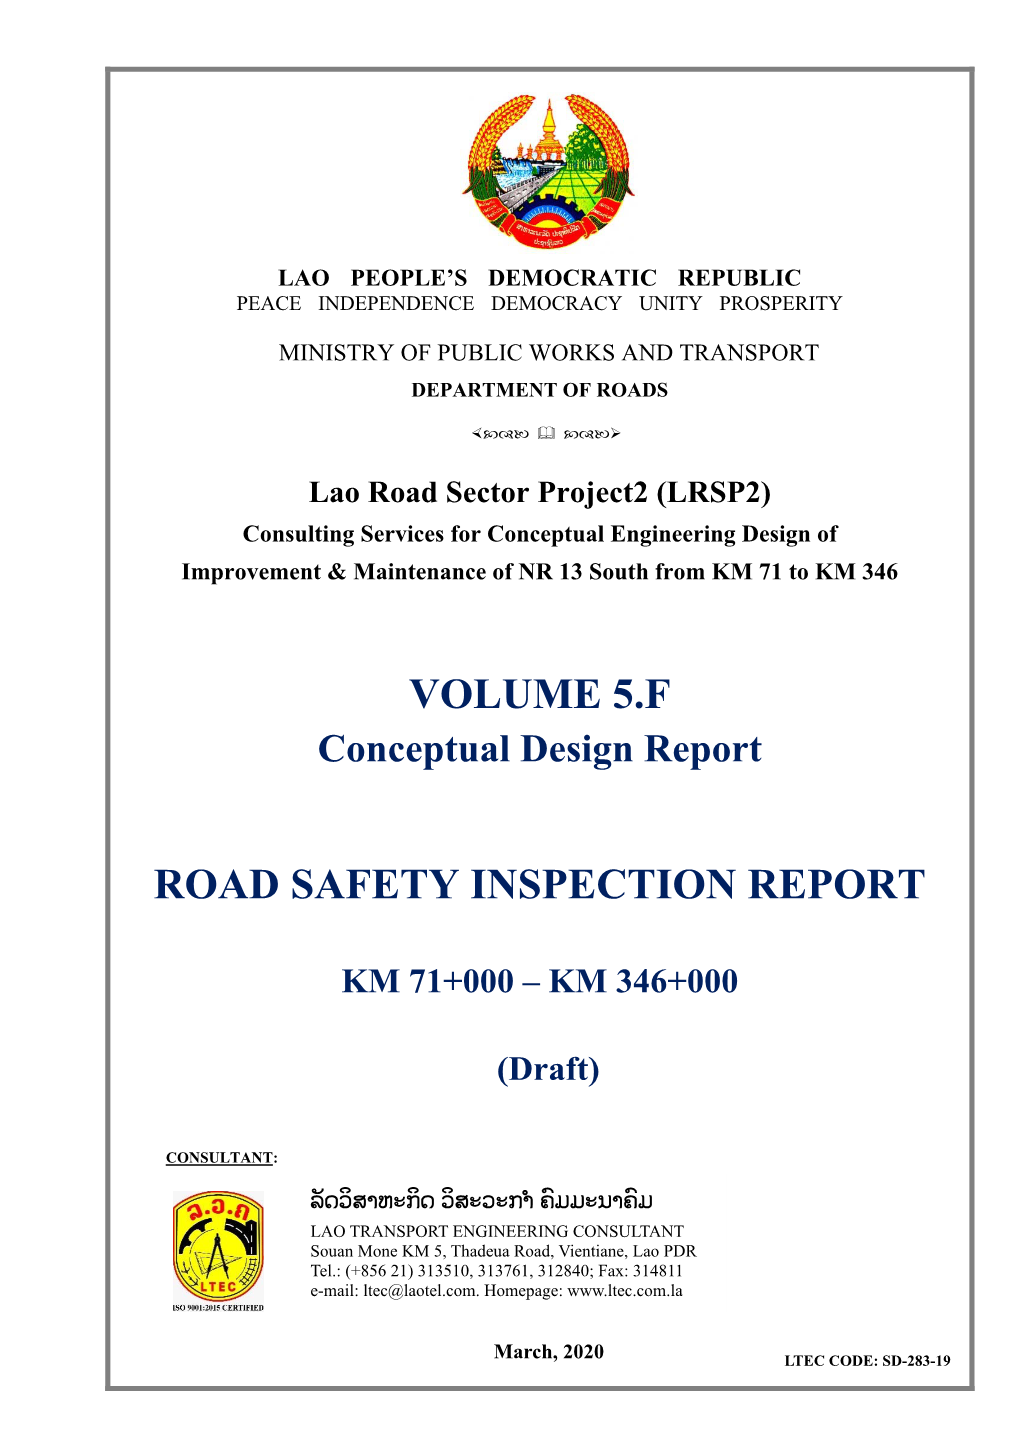 Volume 5.F Road Safety Inspection Report